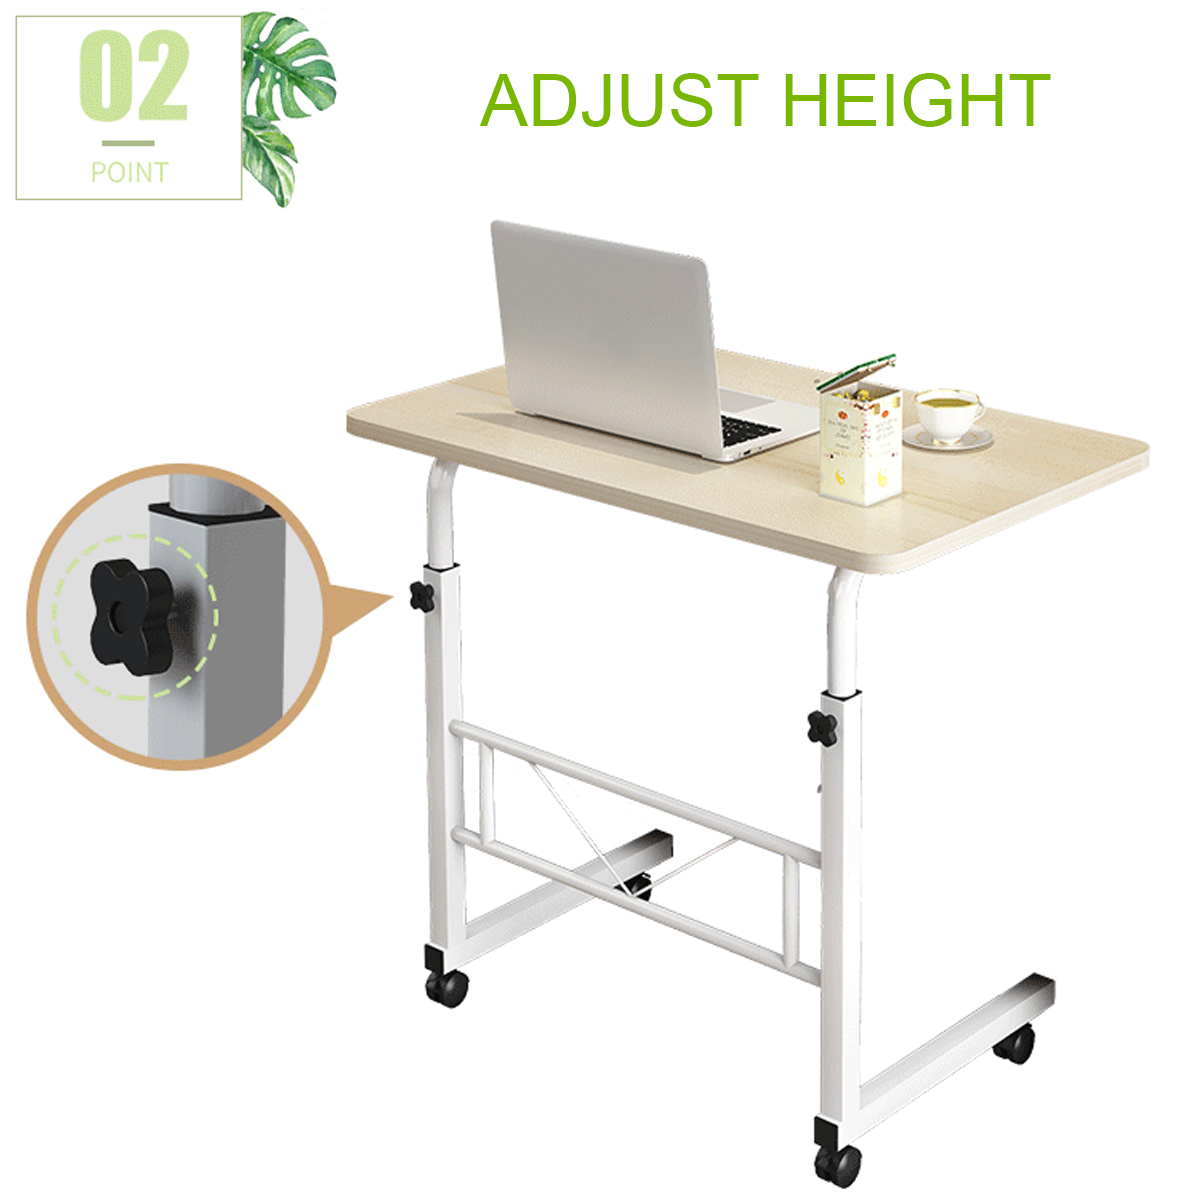 Removable-Laptop-Table-Lifting-Desk-Tabletop-Food-Tray-Bedside-Table-Bed-Sofa-Stand-with-Wheel-1754628-3